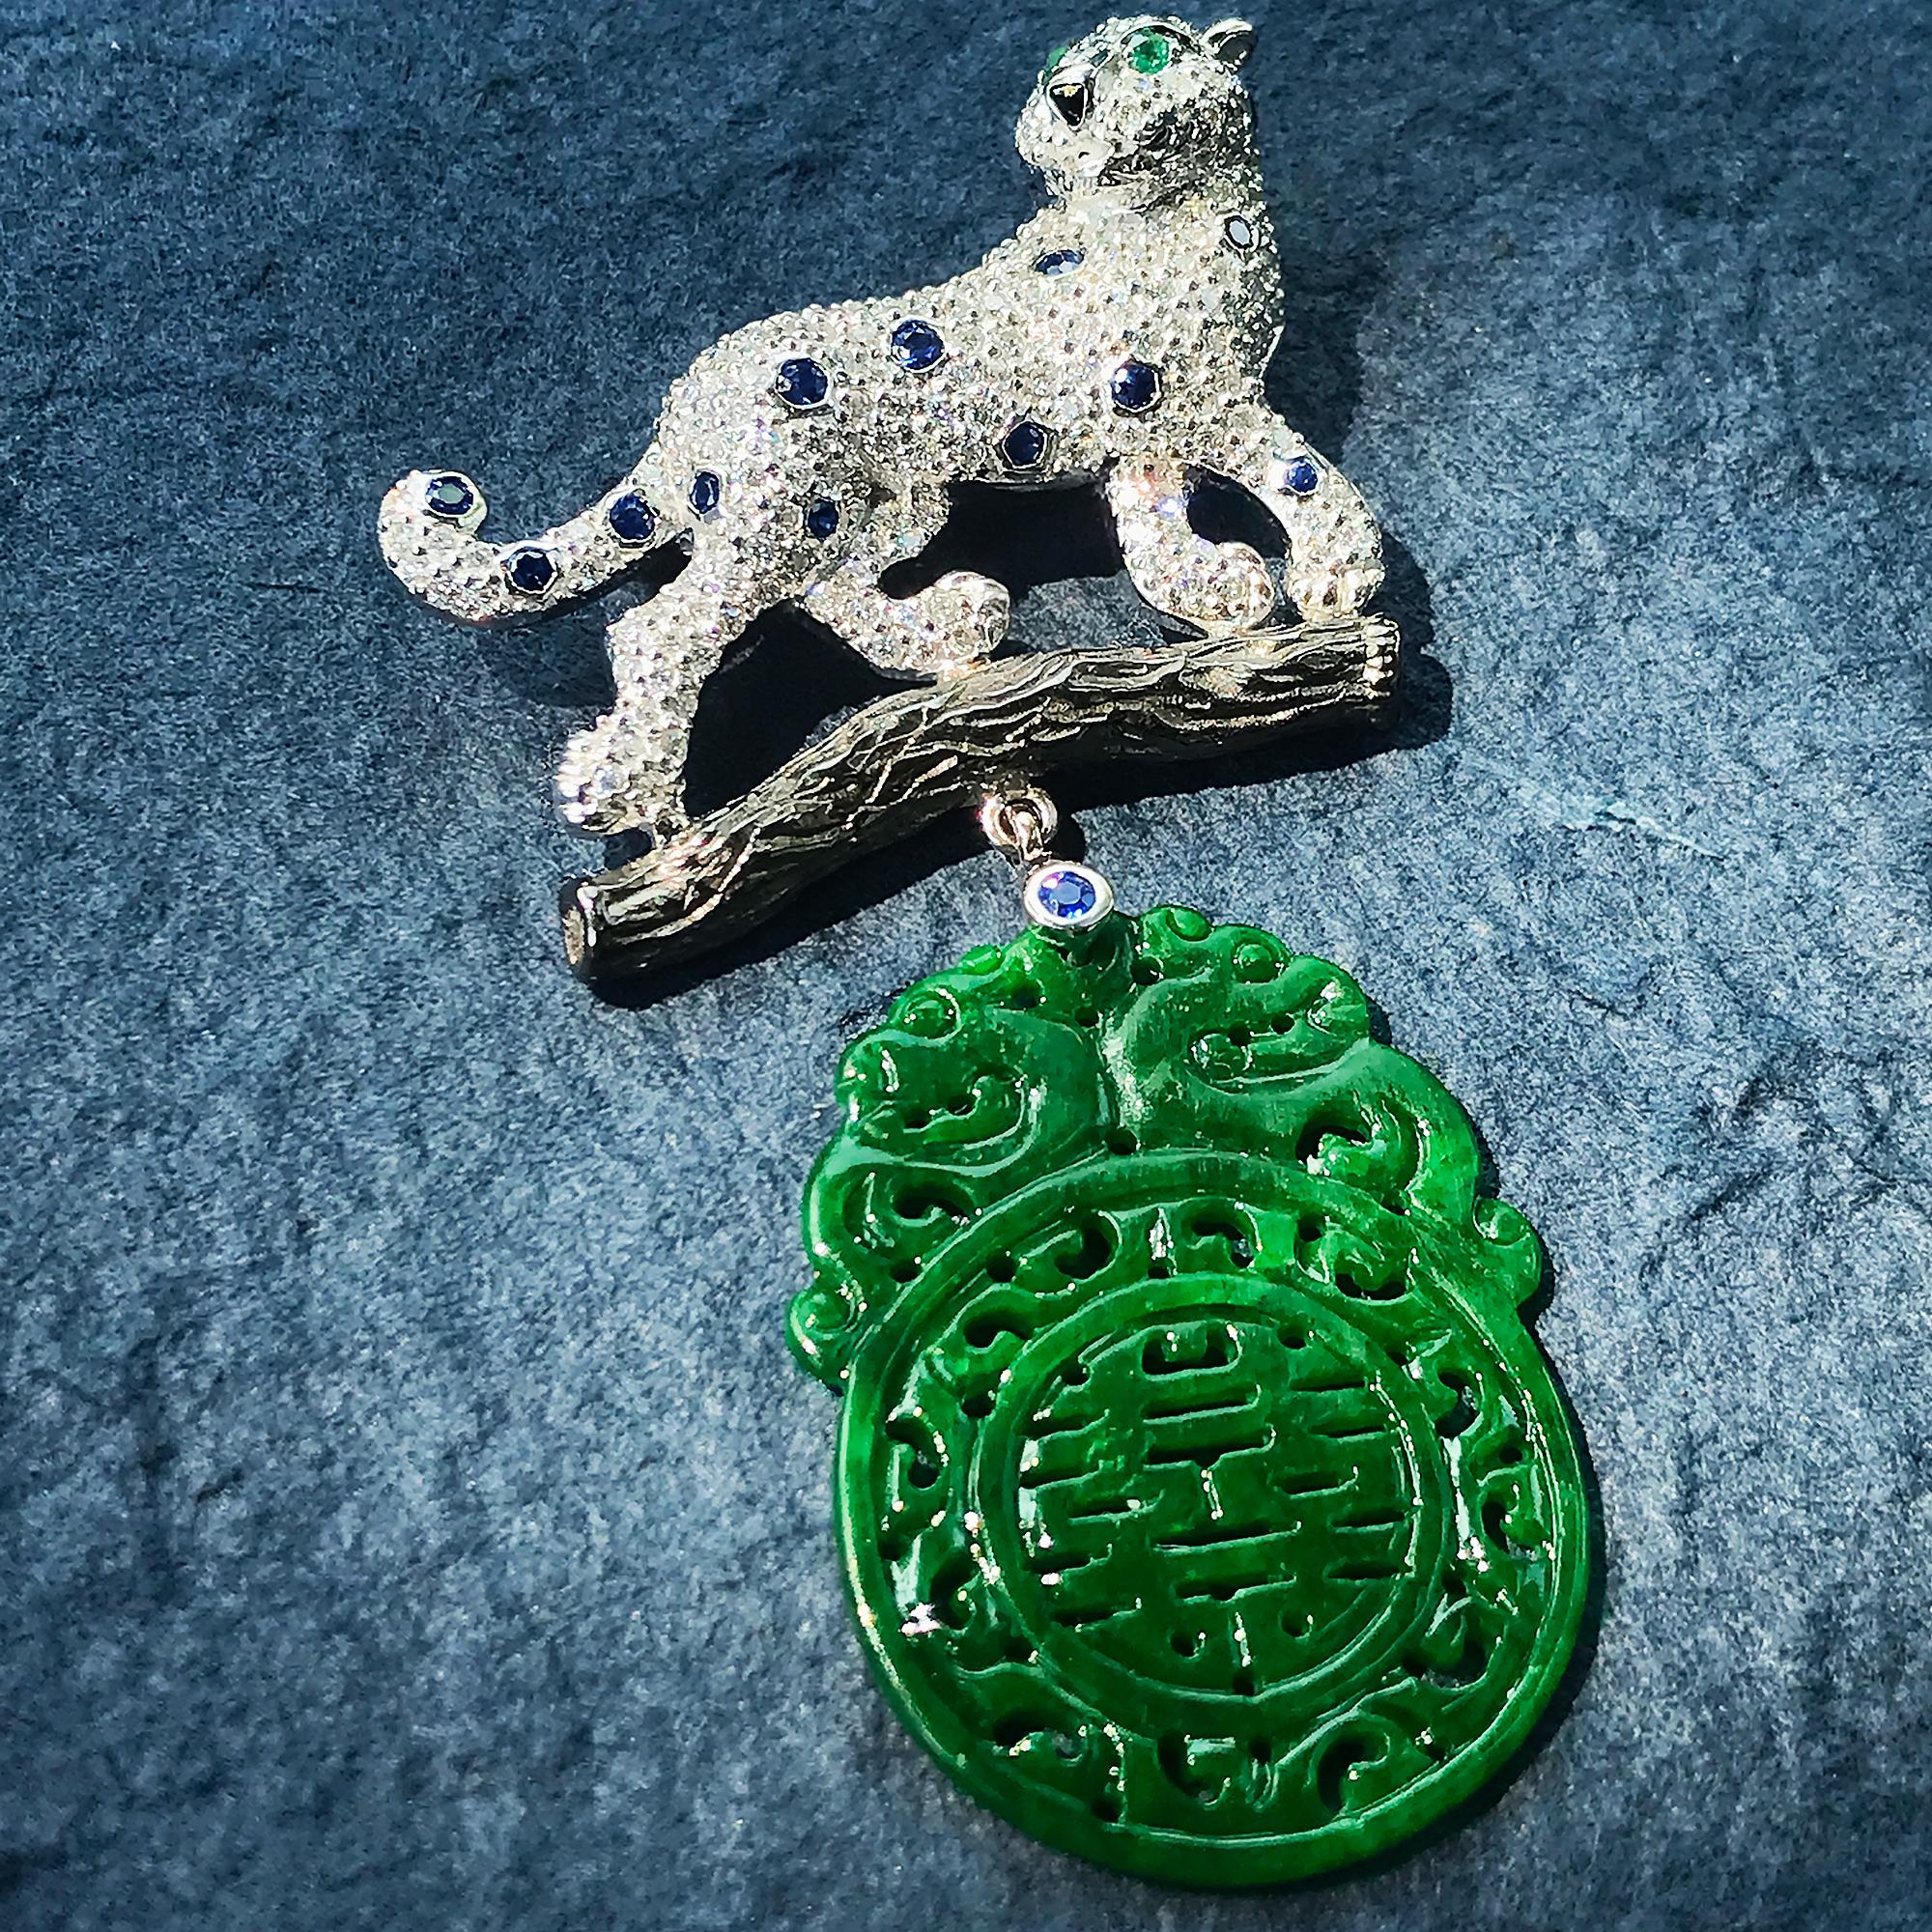 Diamond panther climbing on a branch brooch crafted in 14k white gold, its body set with round diamonds accented with sapphire, partially rotating head, with eyes set with emeralds and onyx nose. Below is a 11.9 carats beautifully carved jade. A